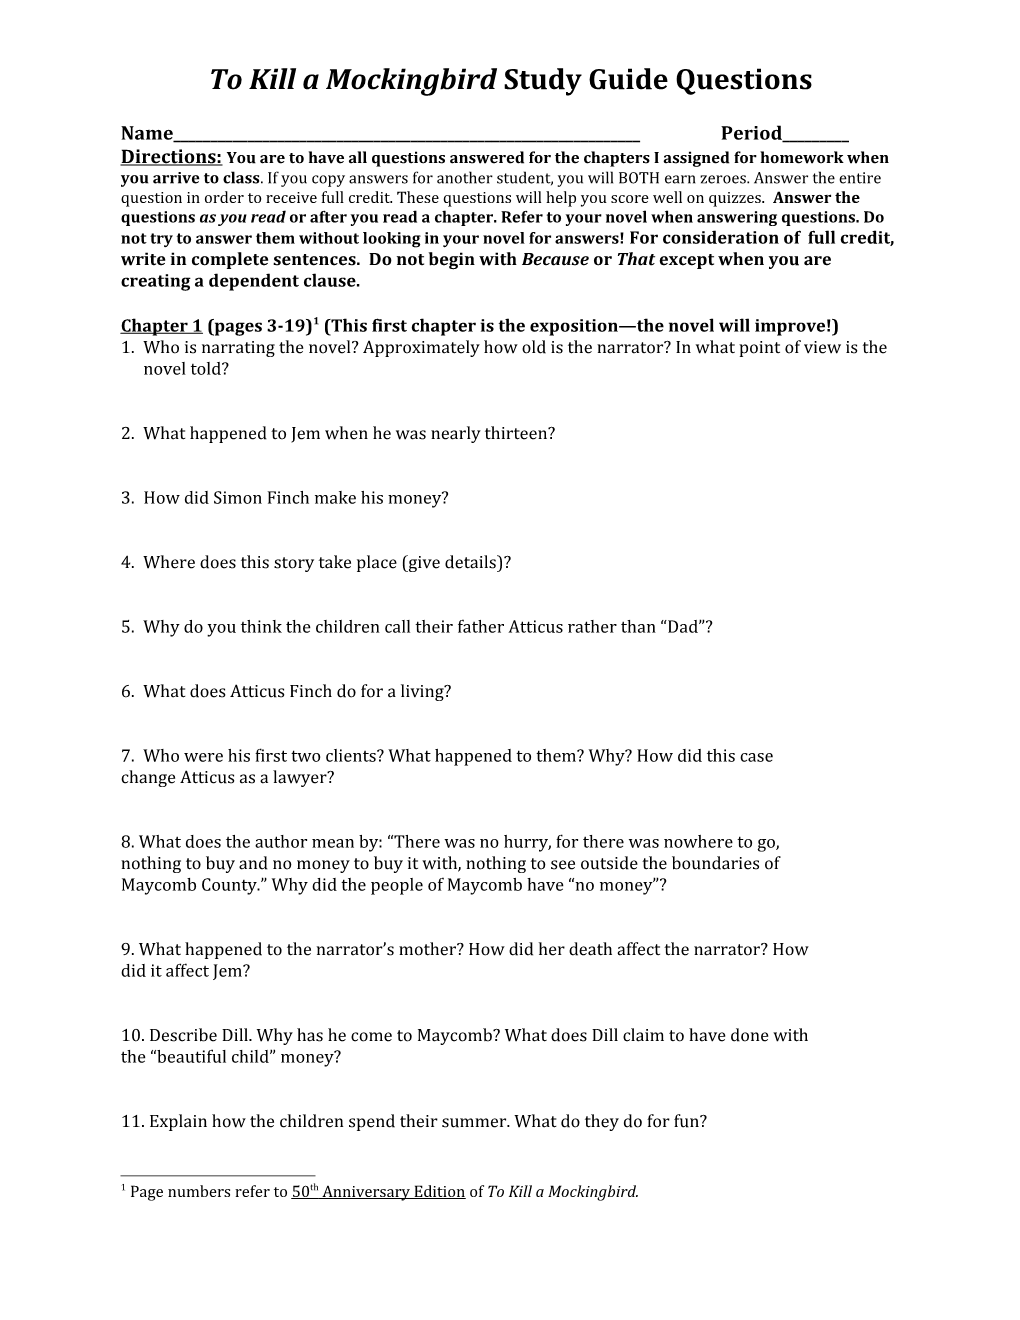 To Kill a Mockingbird Study Guide Questions s1